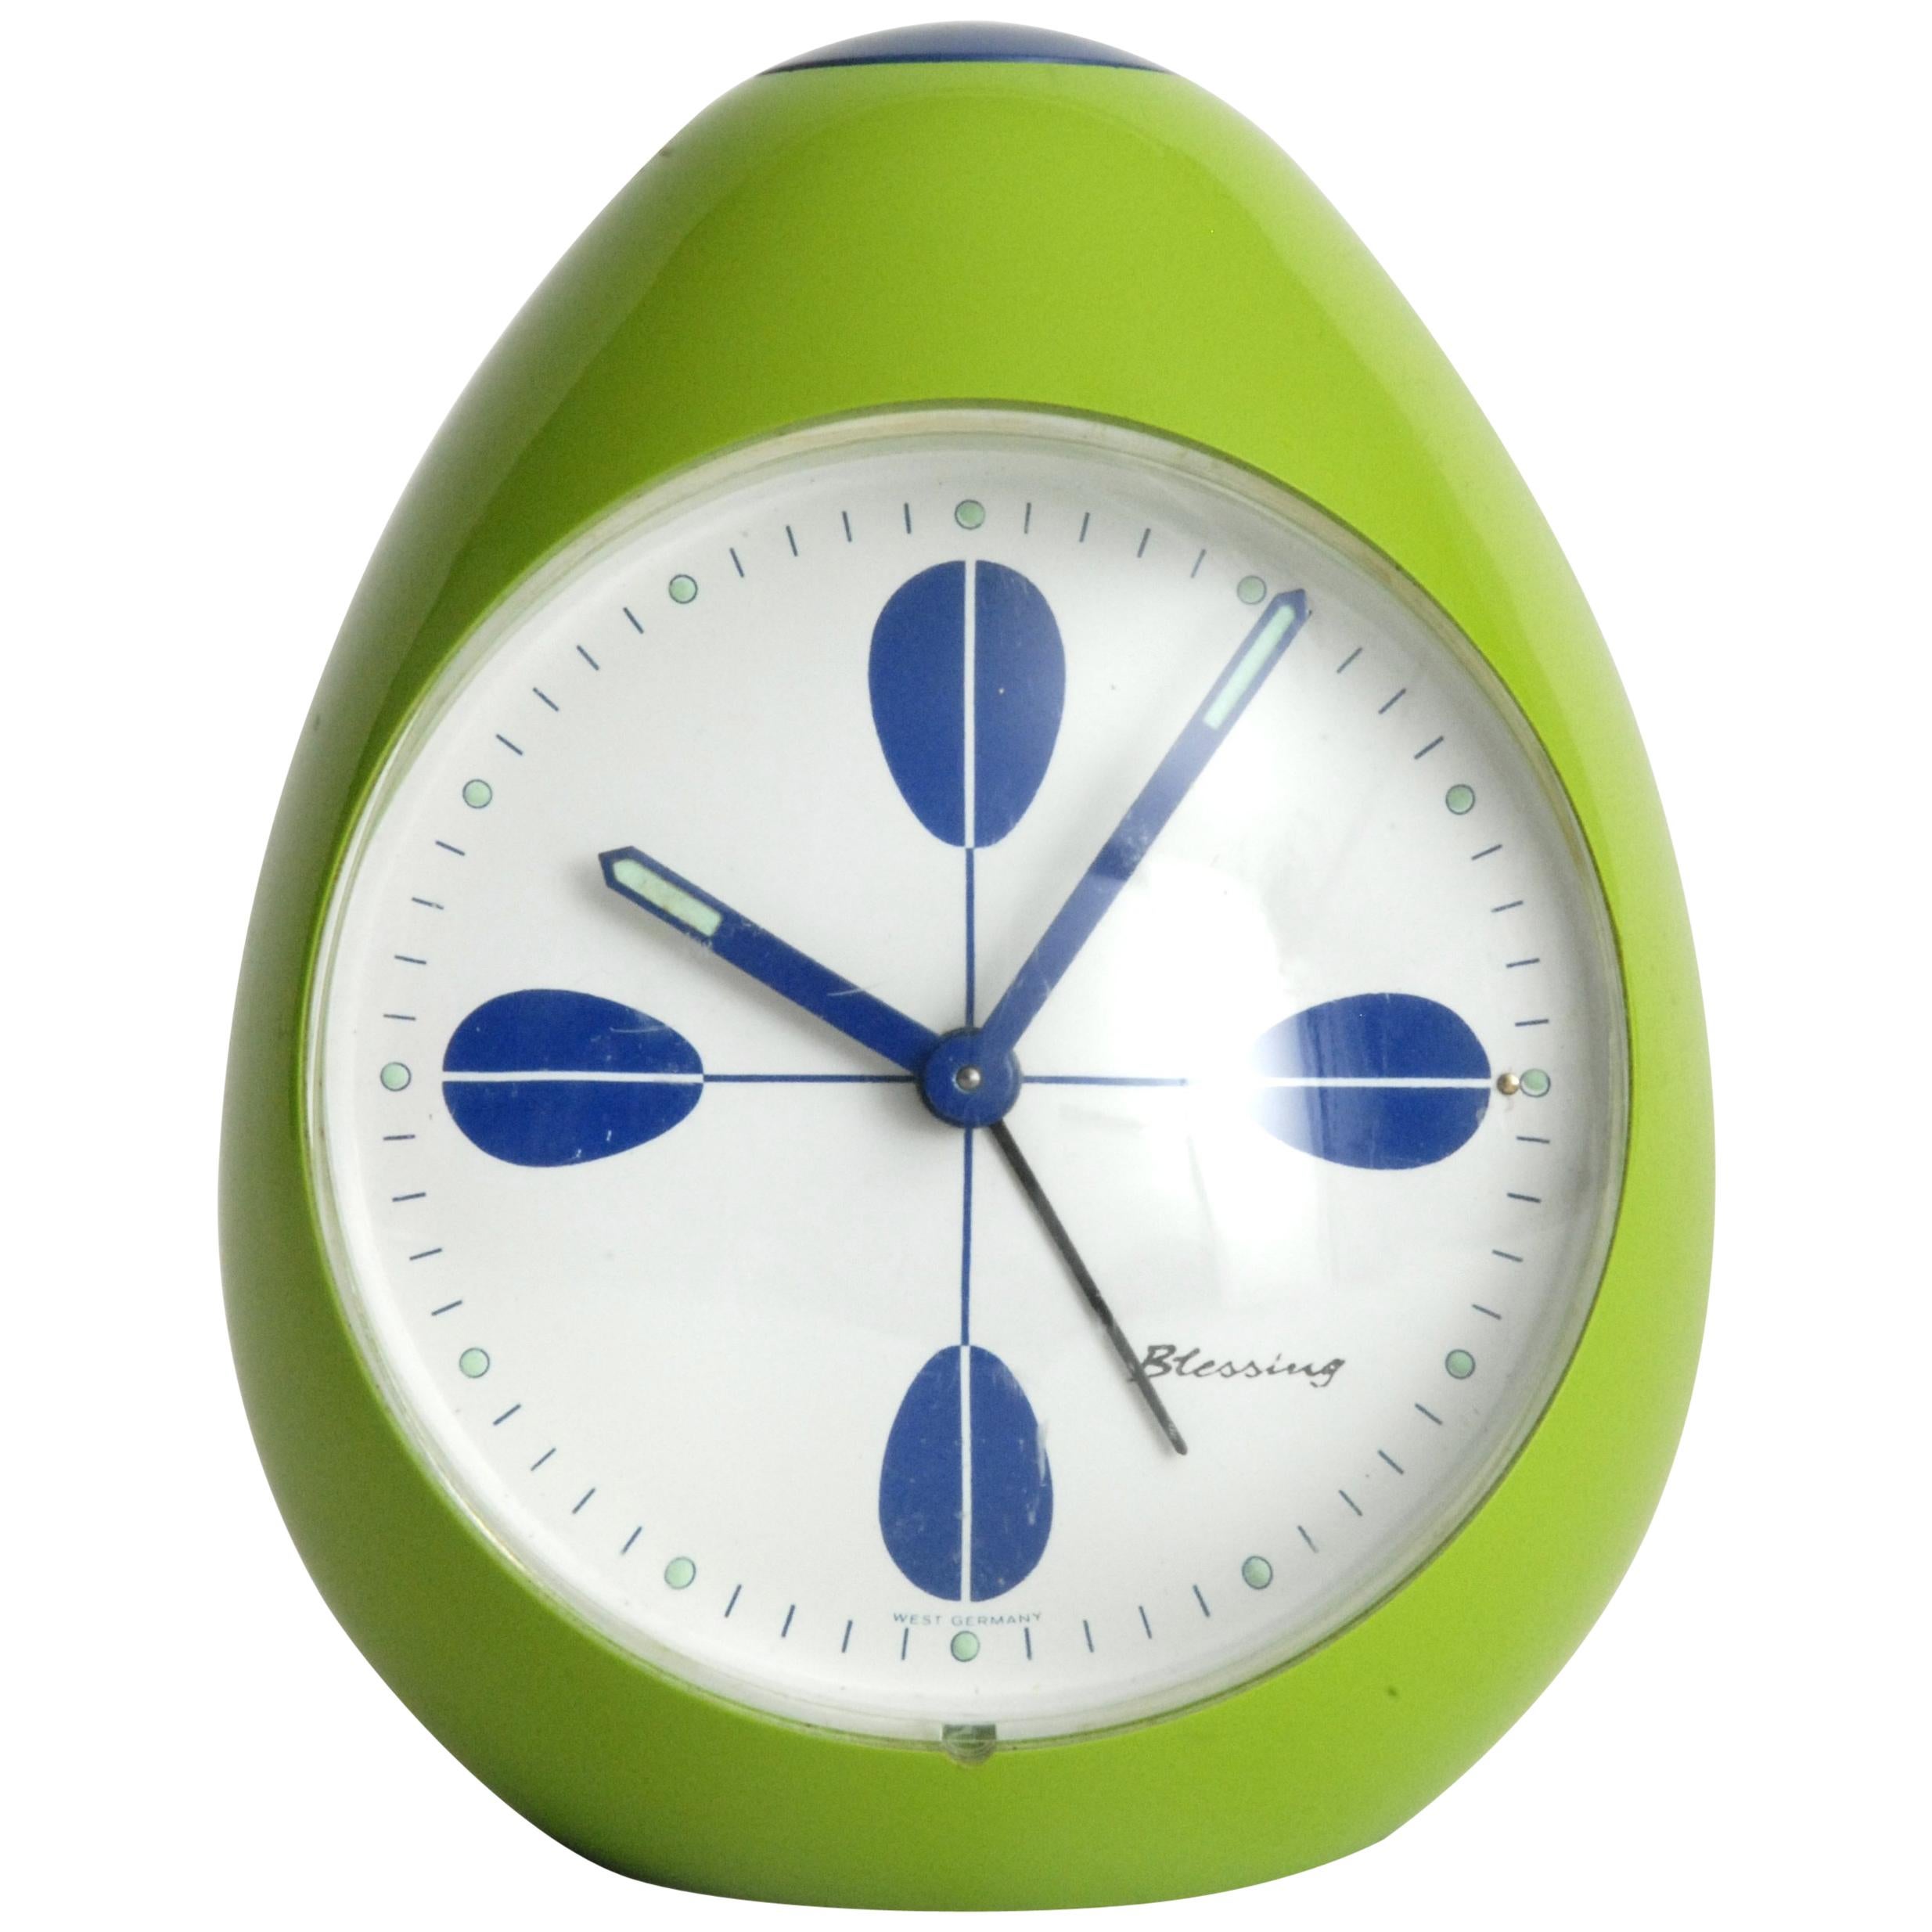 Blessing Pear Shape Clock West Germany Green and Blue Retro, circa 1968